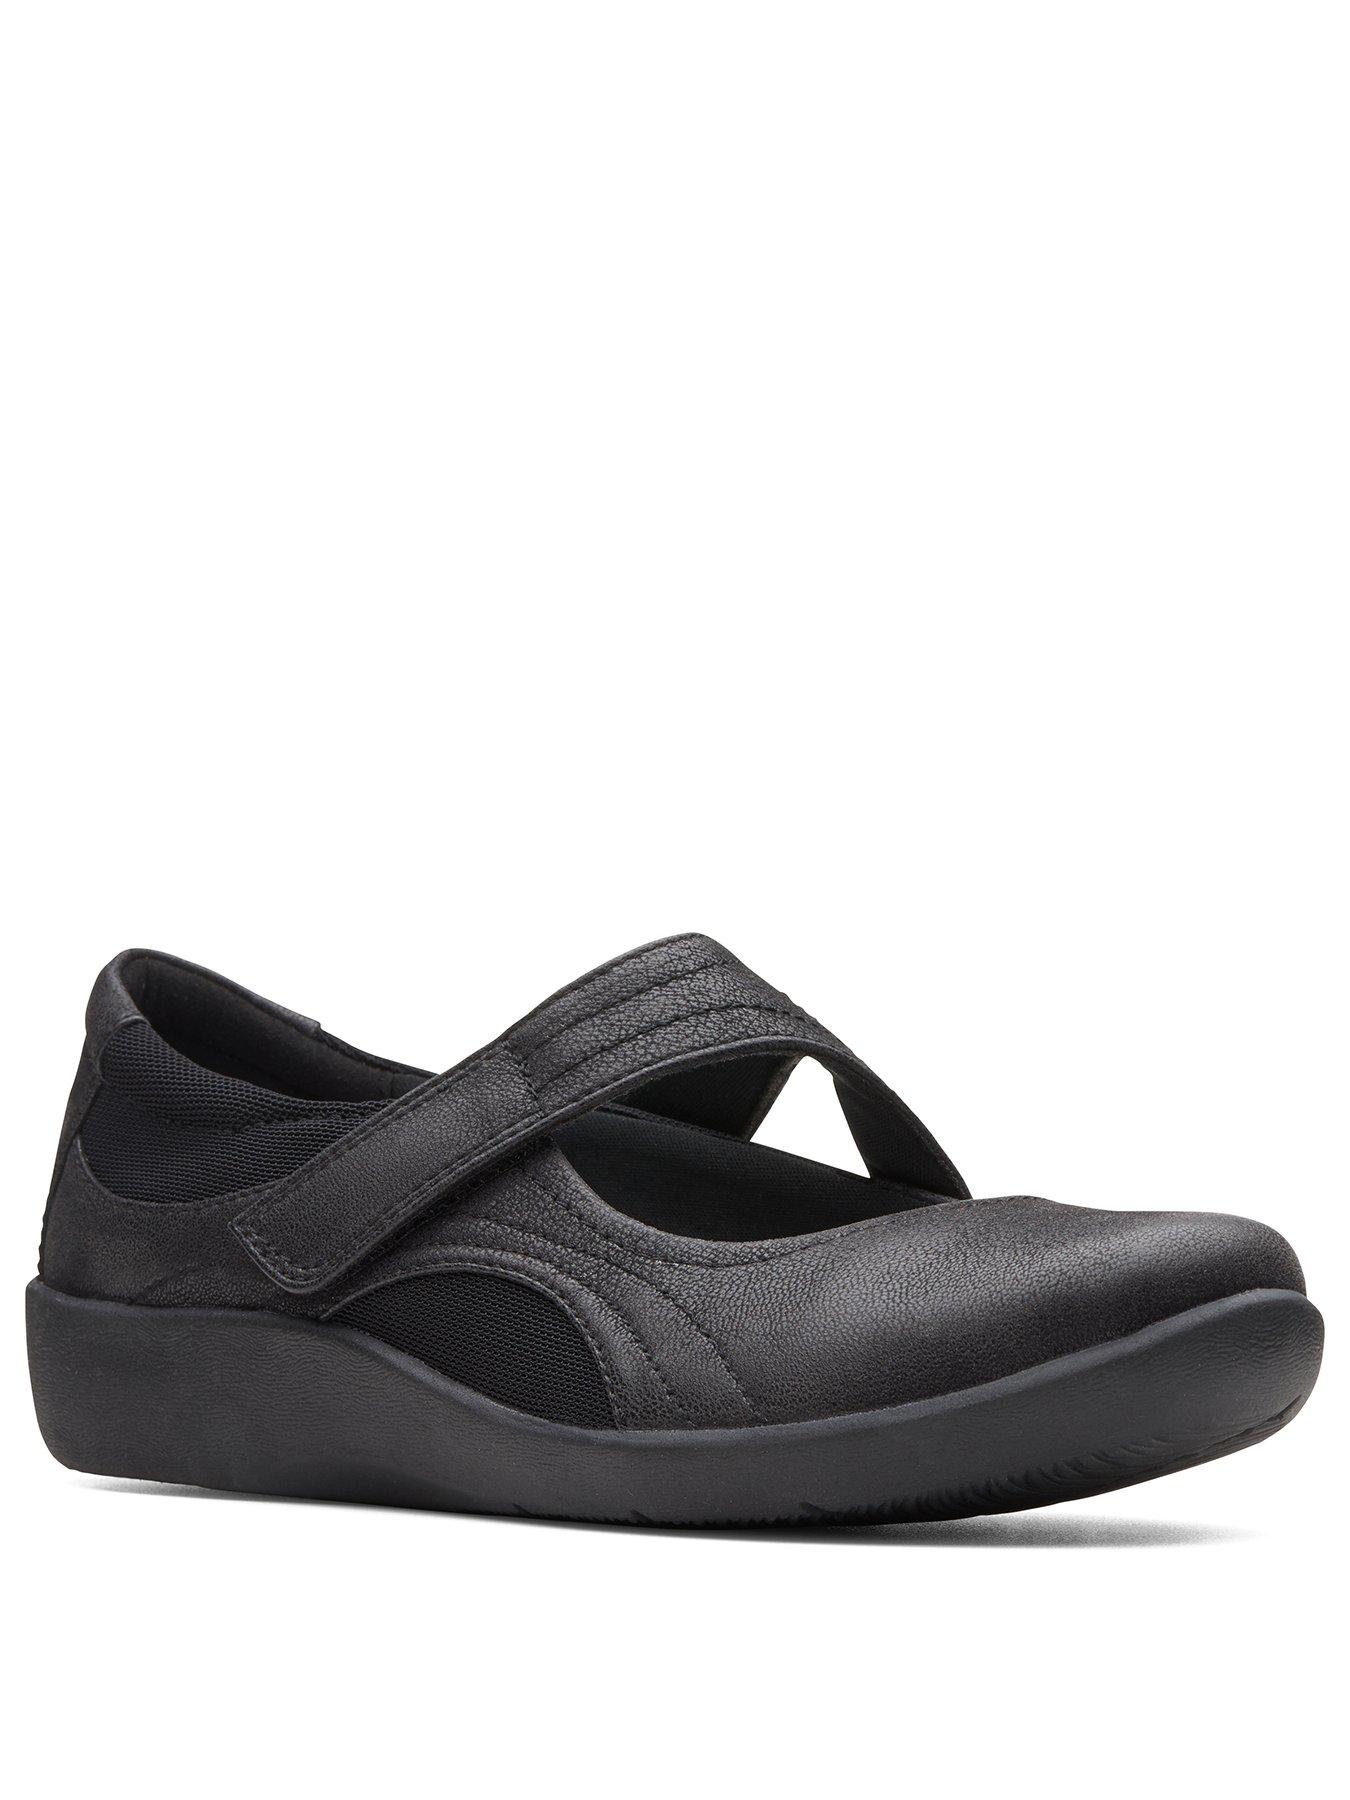 clarks wide fit womens shoes